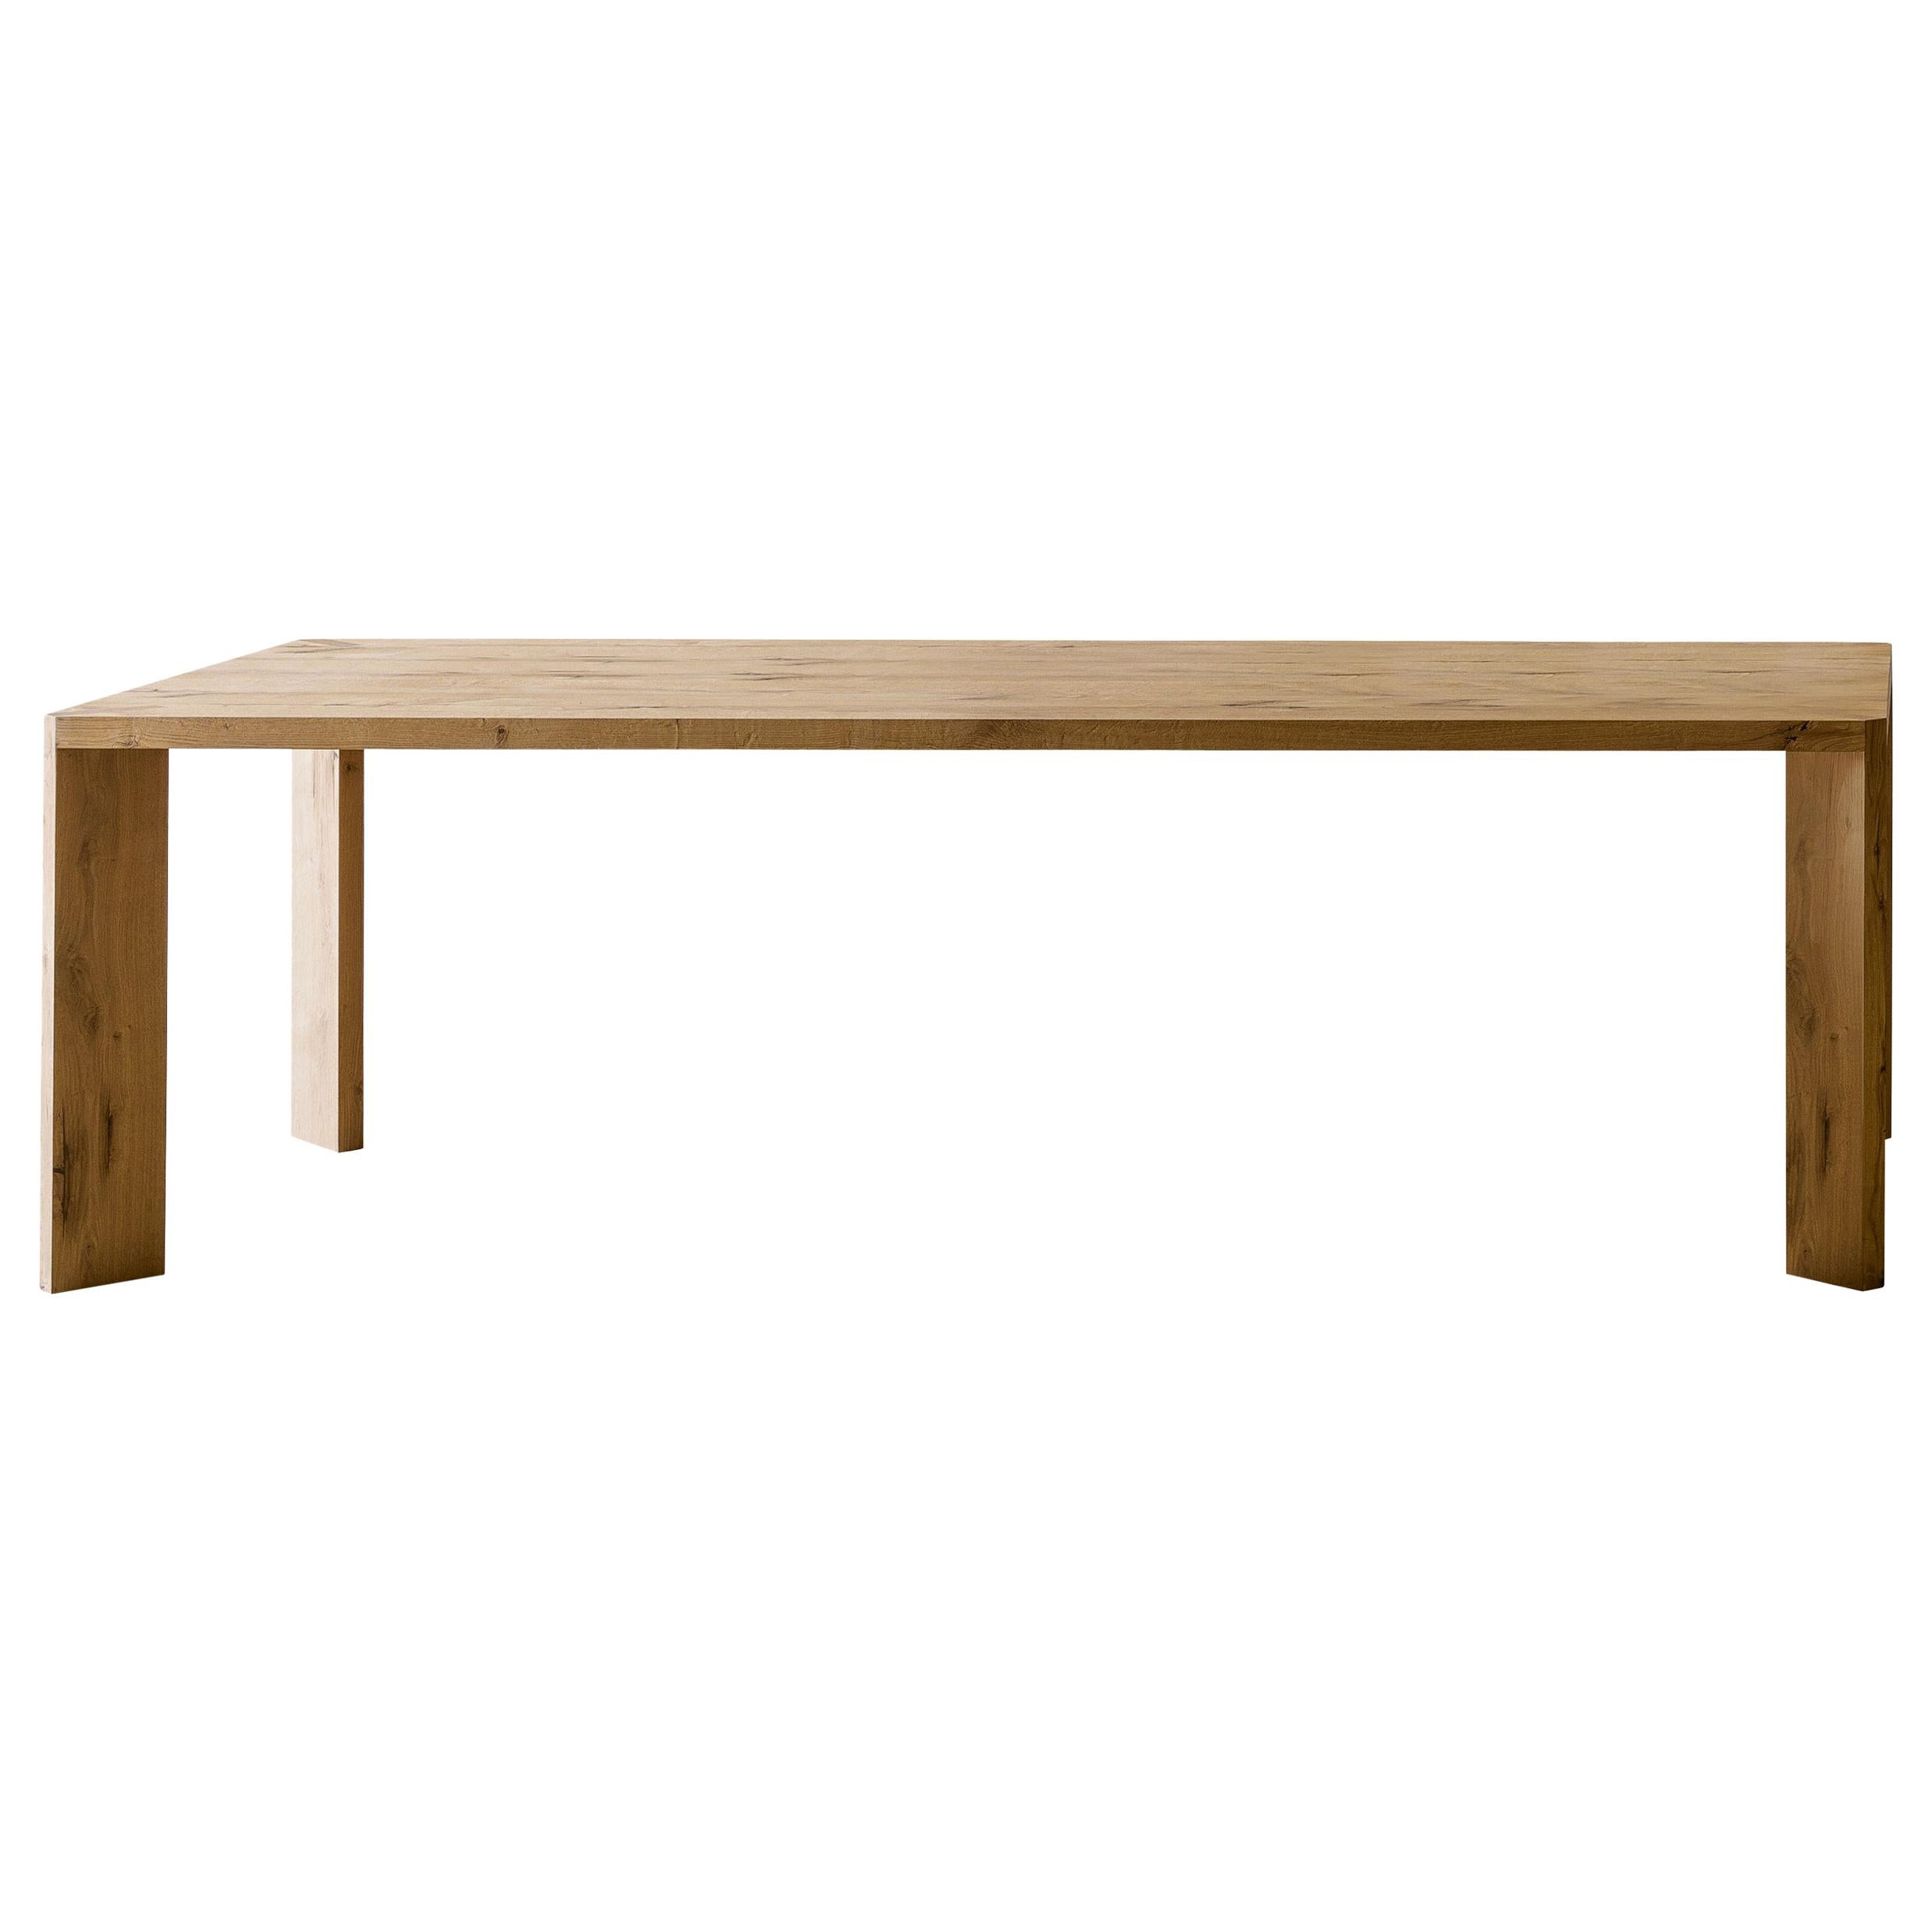 Manero Medium Table in Vintage Oak by Paolo Cappello For Sale